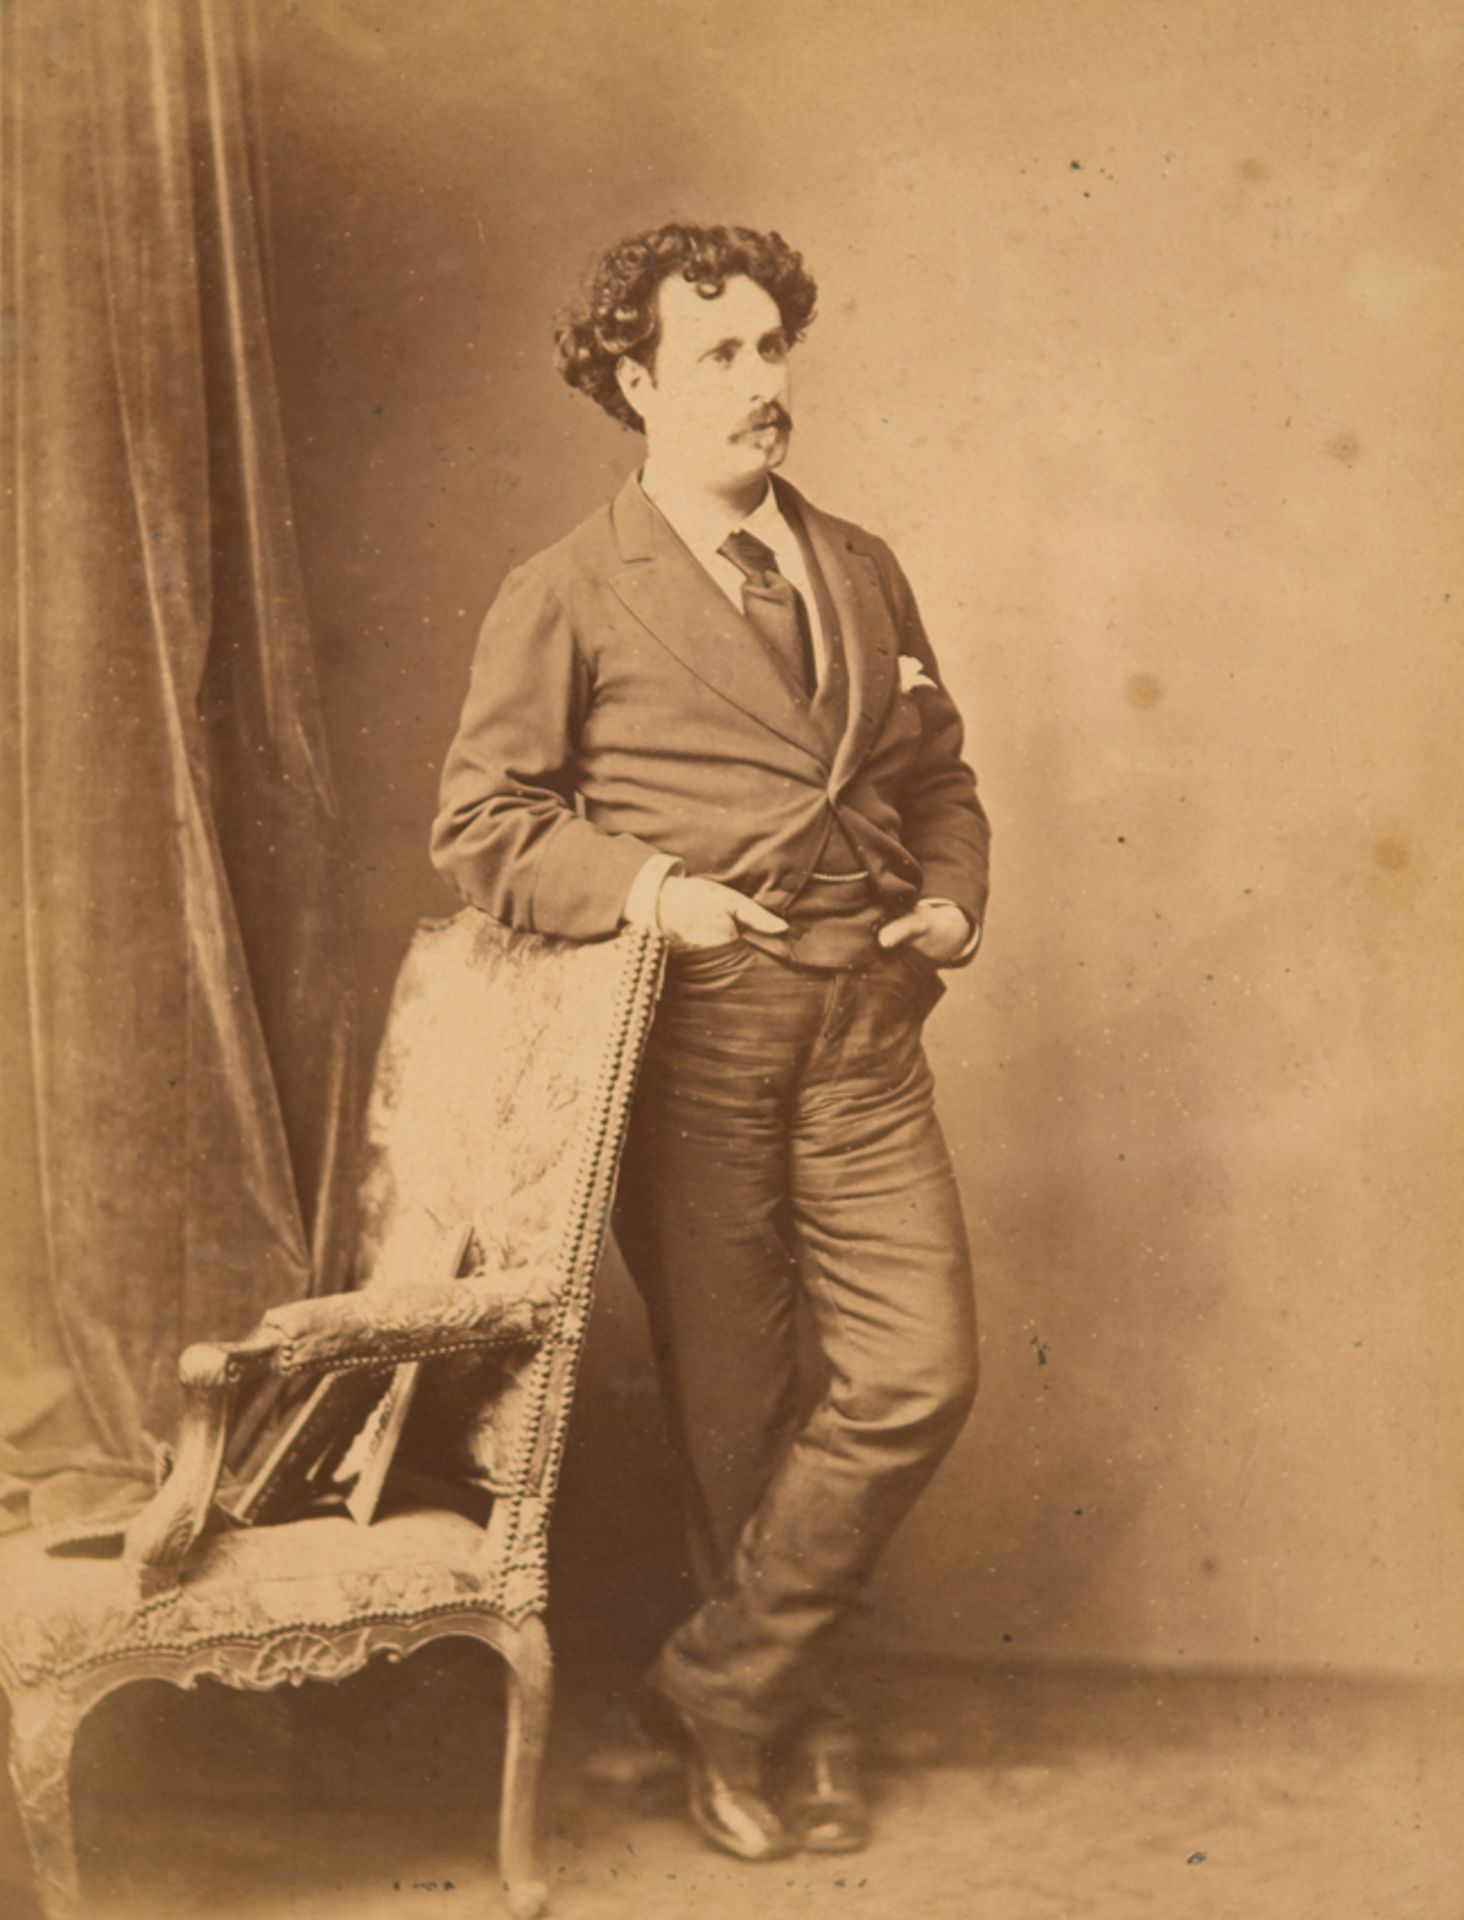 Original black and white photographic portrait of the painter Mariano Fortuny y Marsal.